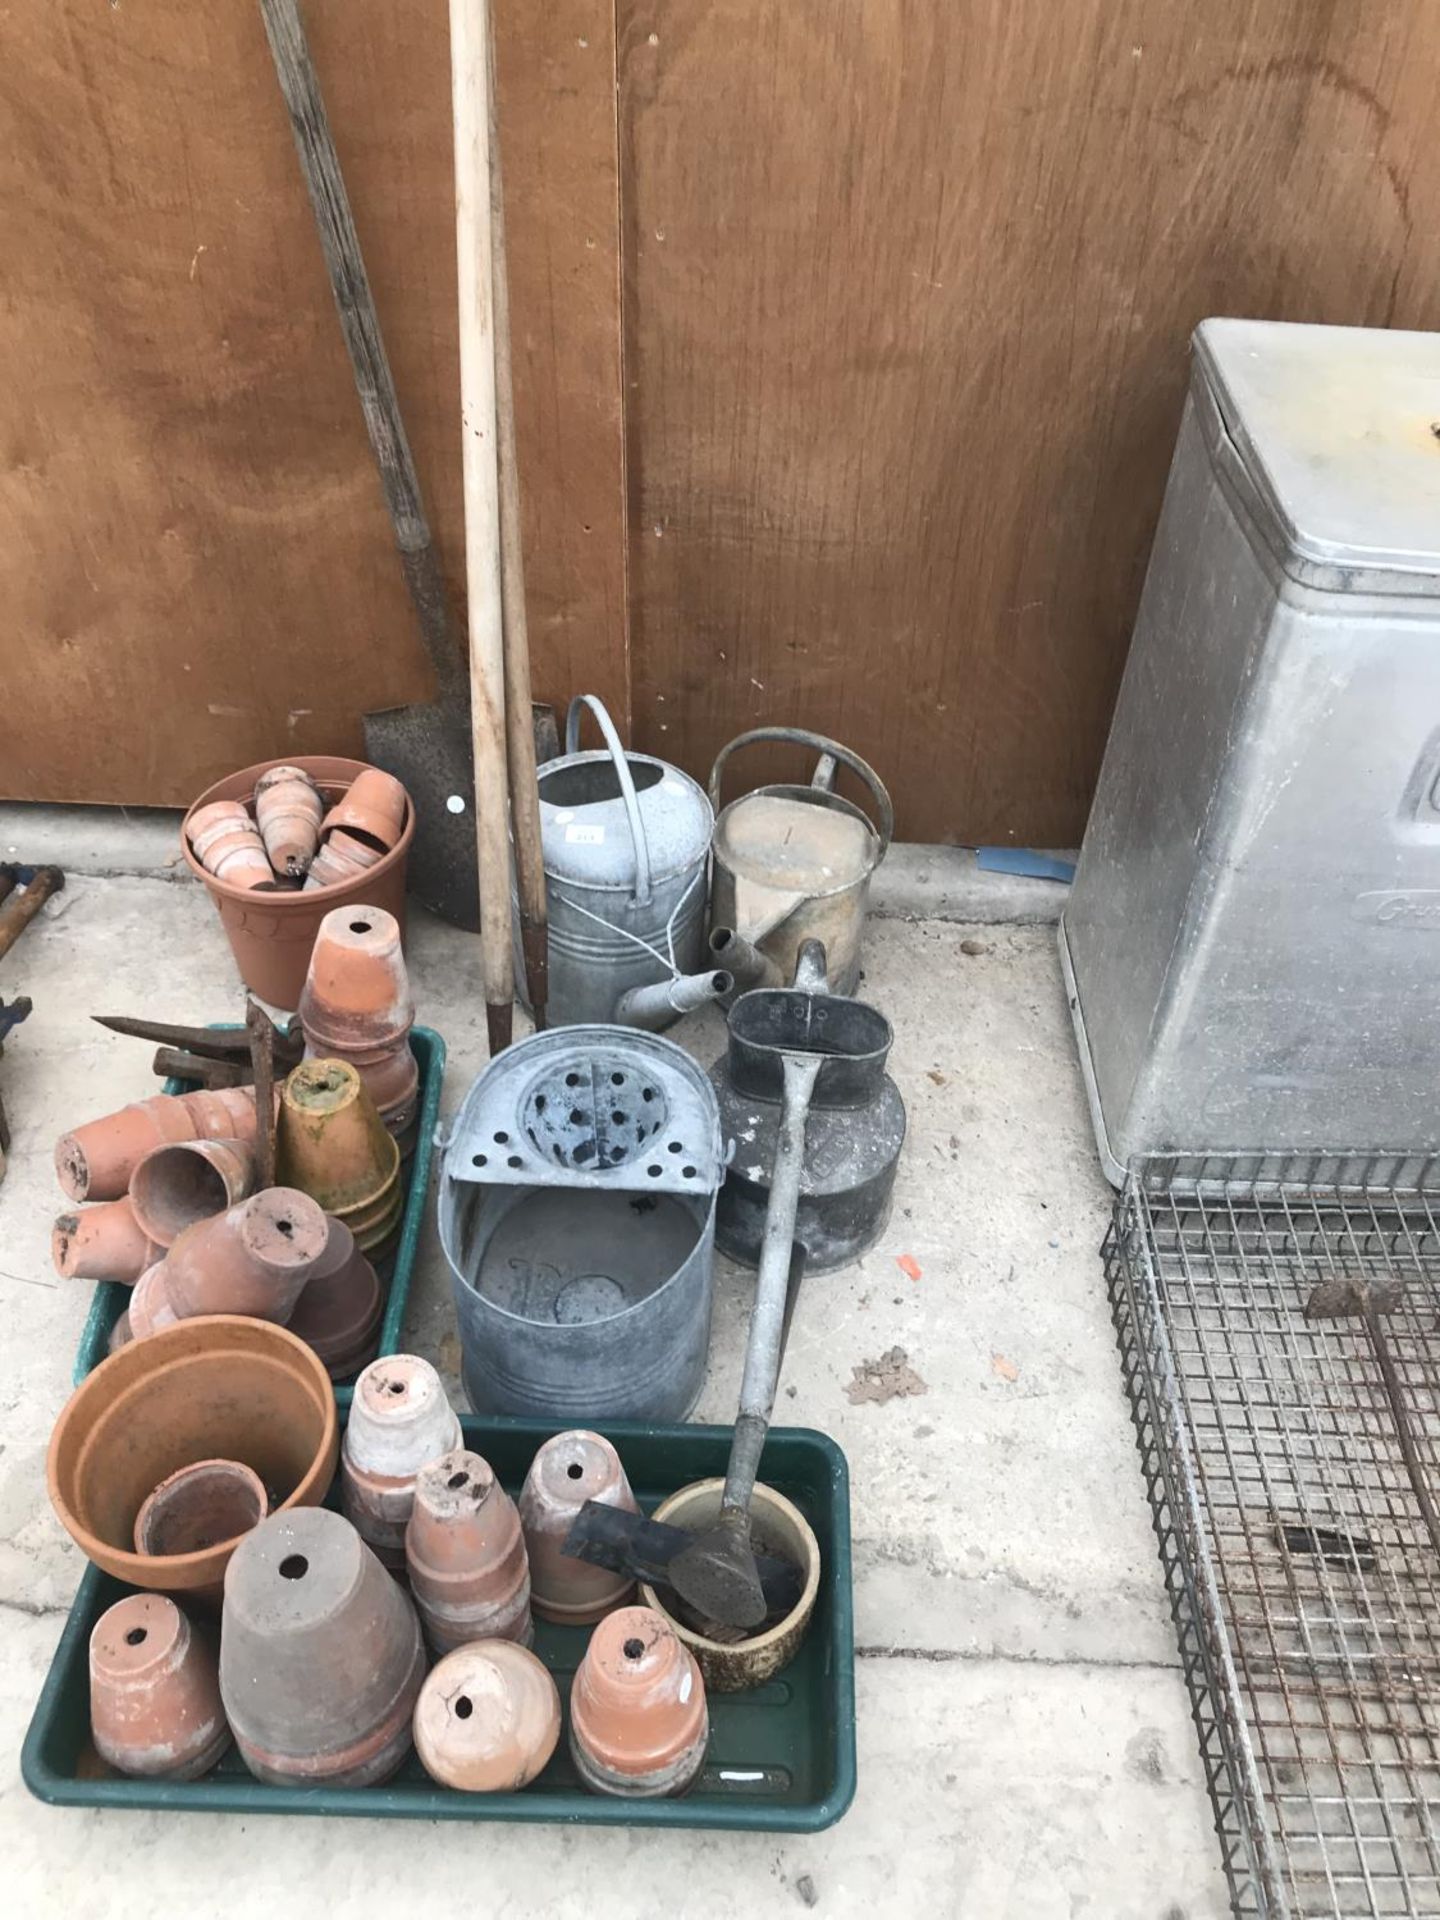 THREE VINTAGE GALVANISED WATERING CANS, GALVANISED MOP BUCKET, TERRACOTTA PLANT POTS, TWO HOES AND A